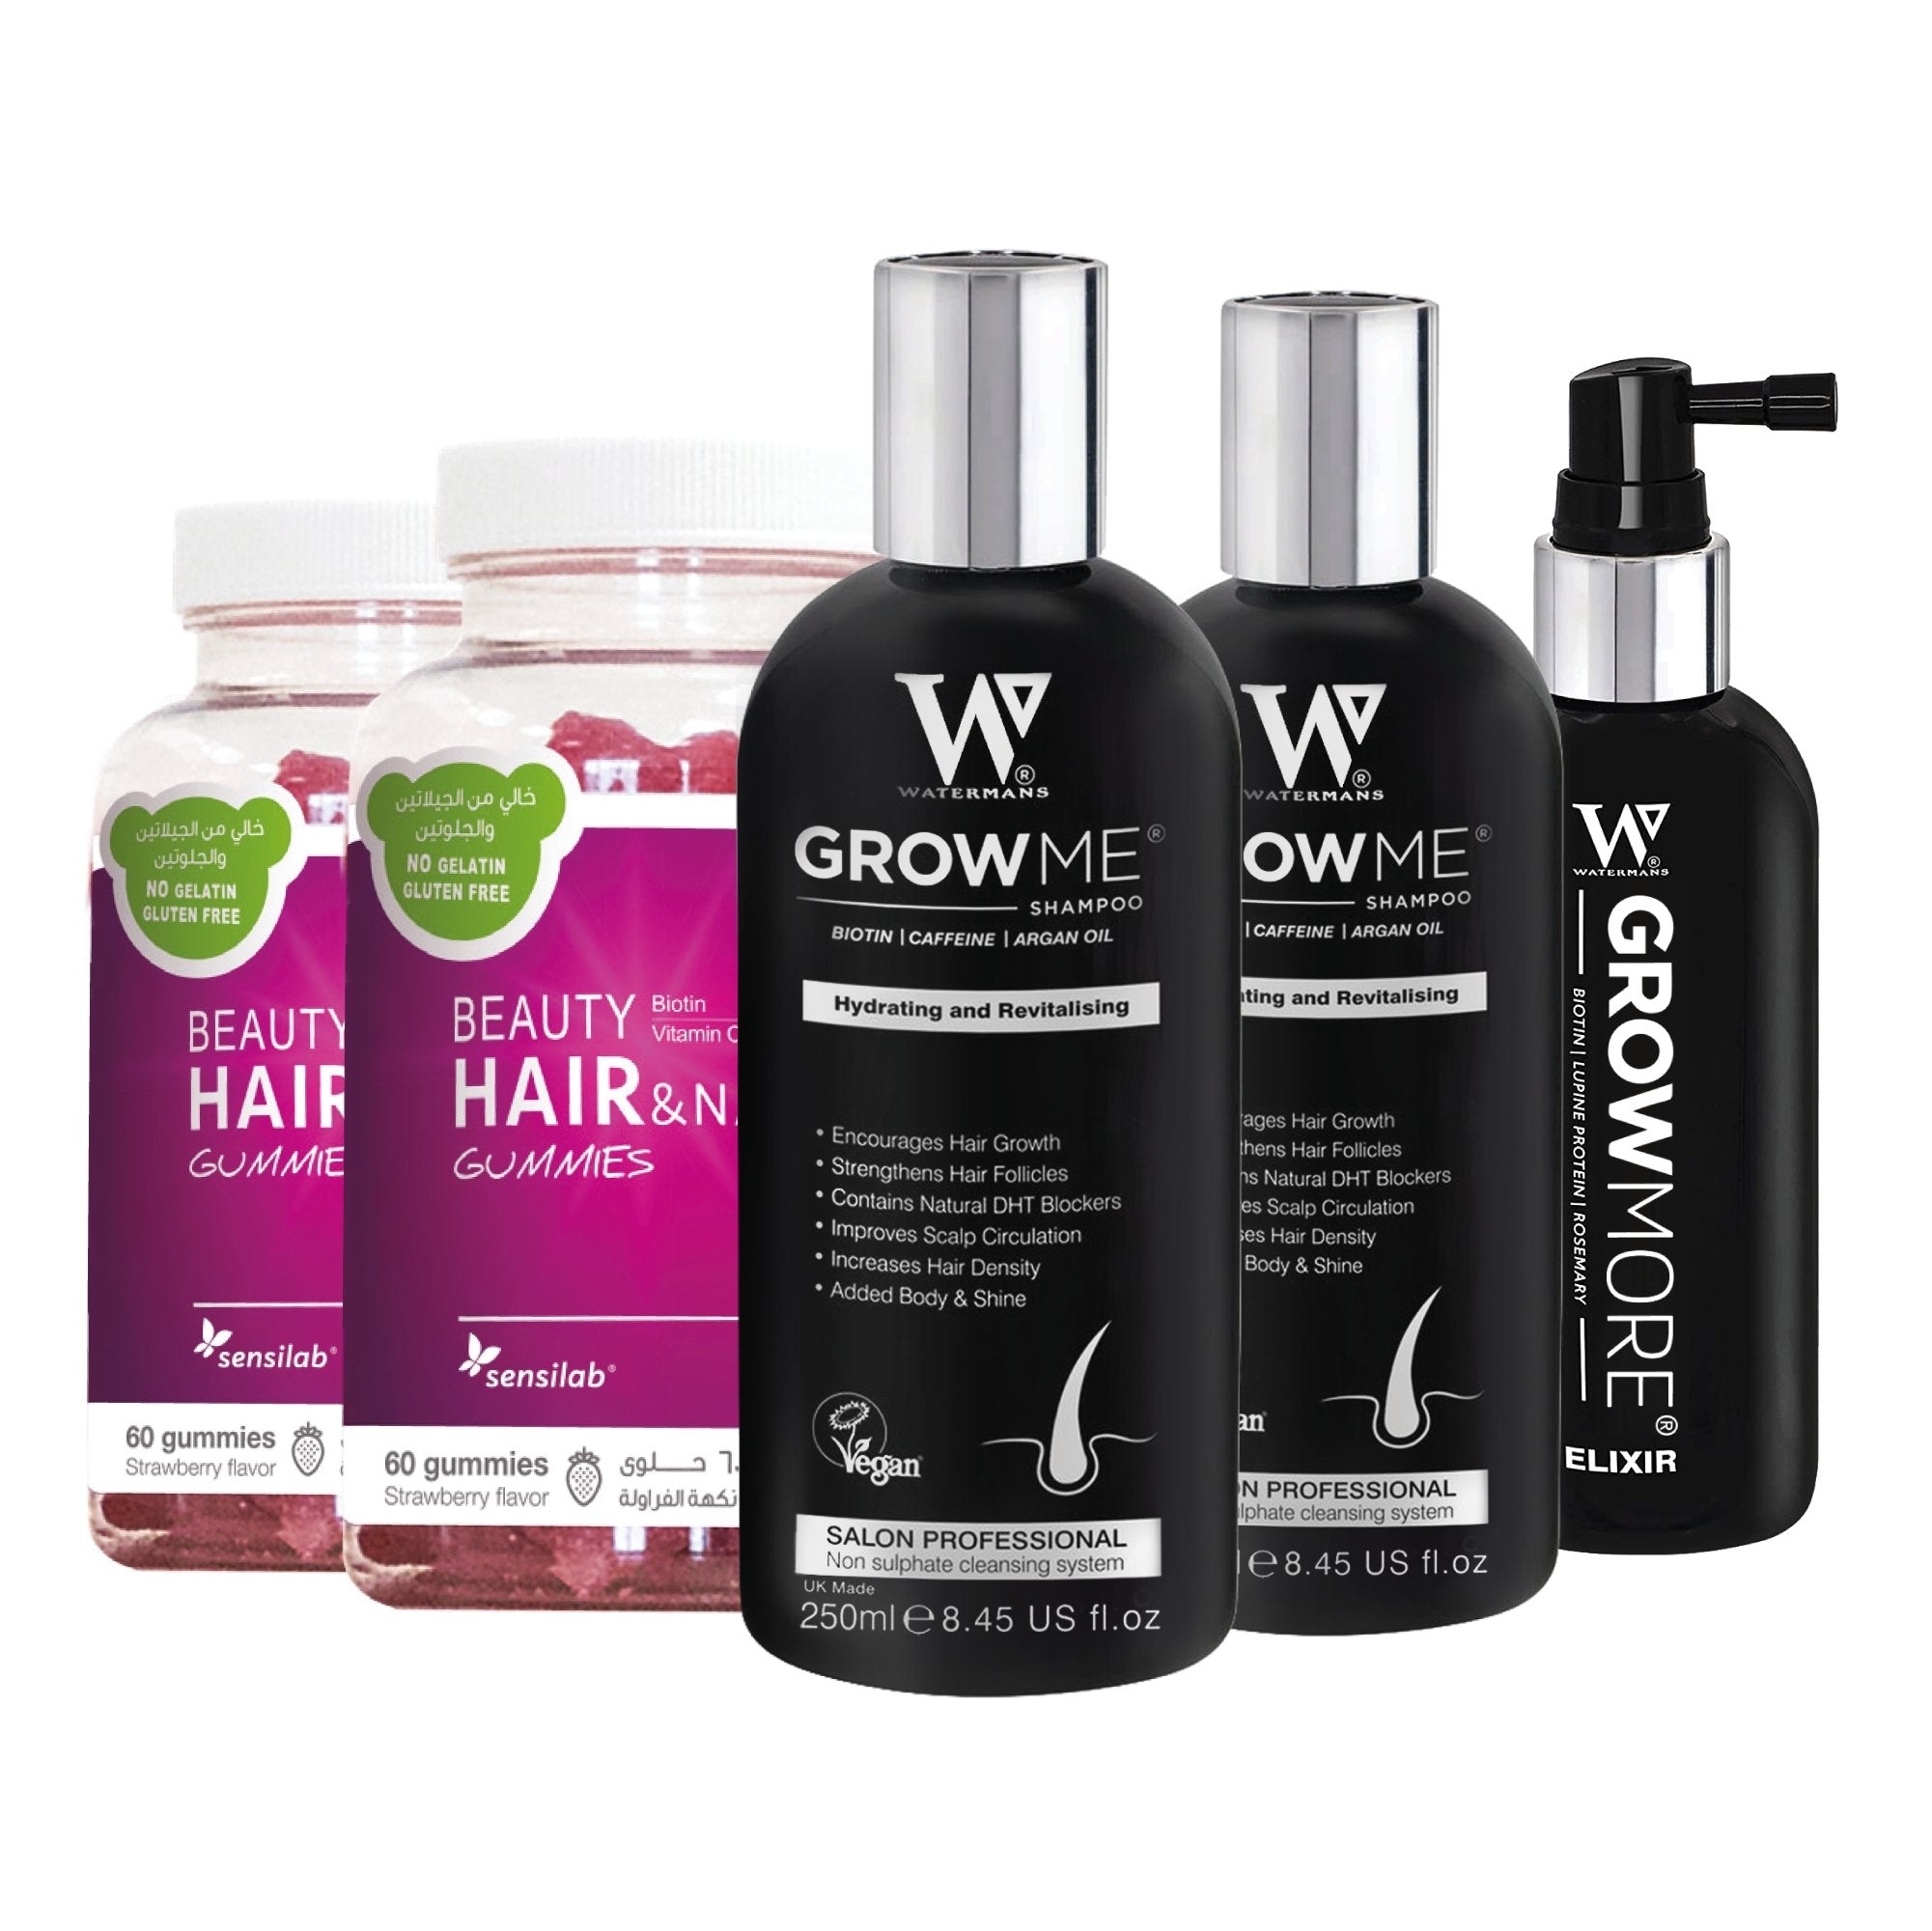 The Ultimate Hair Growth Bundle